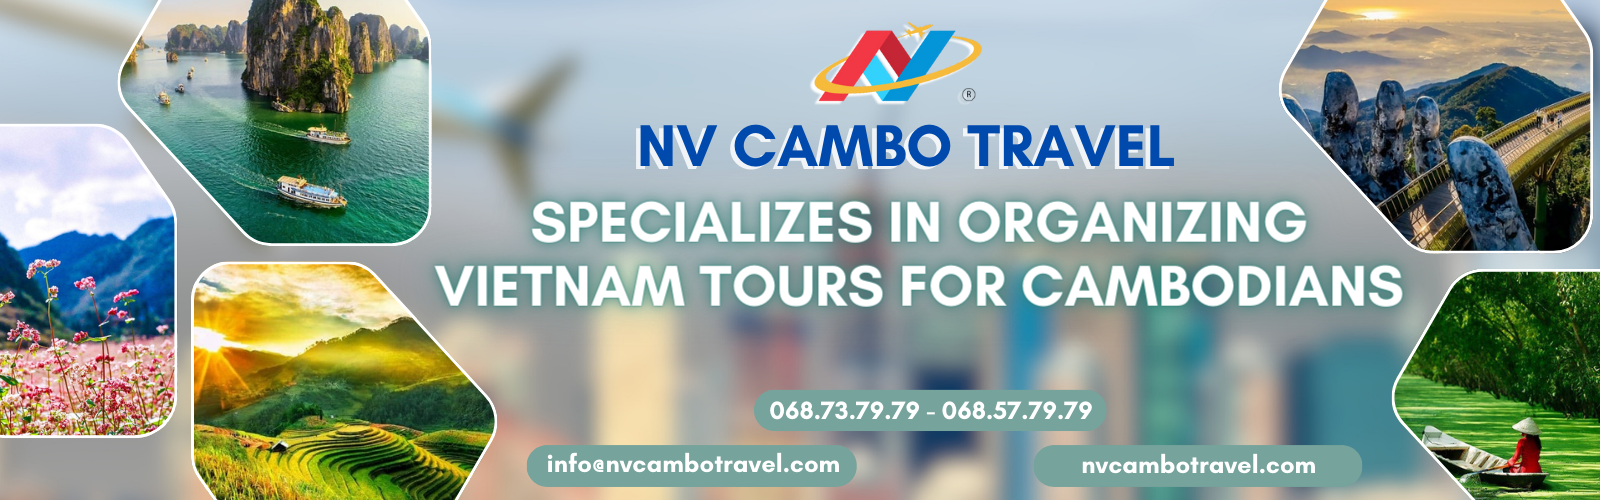 Specializes in organizing Vietnam tours for Cambodians